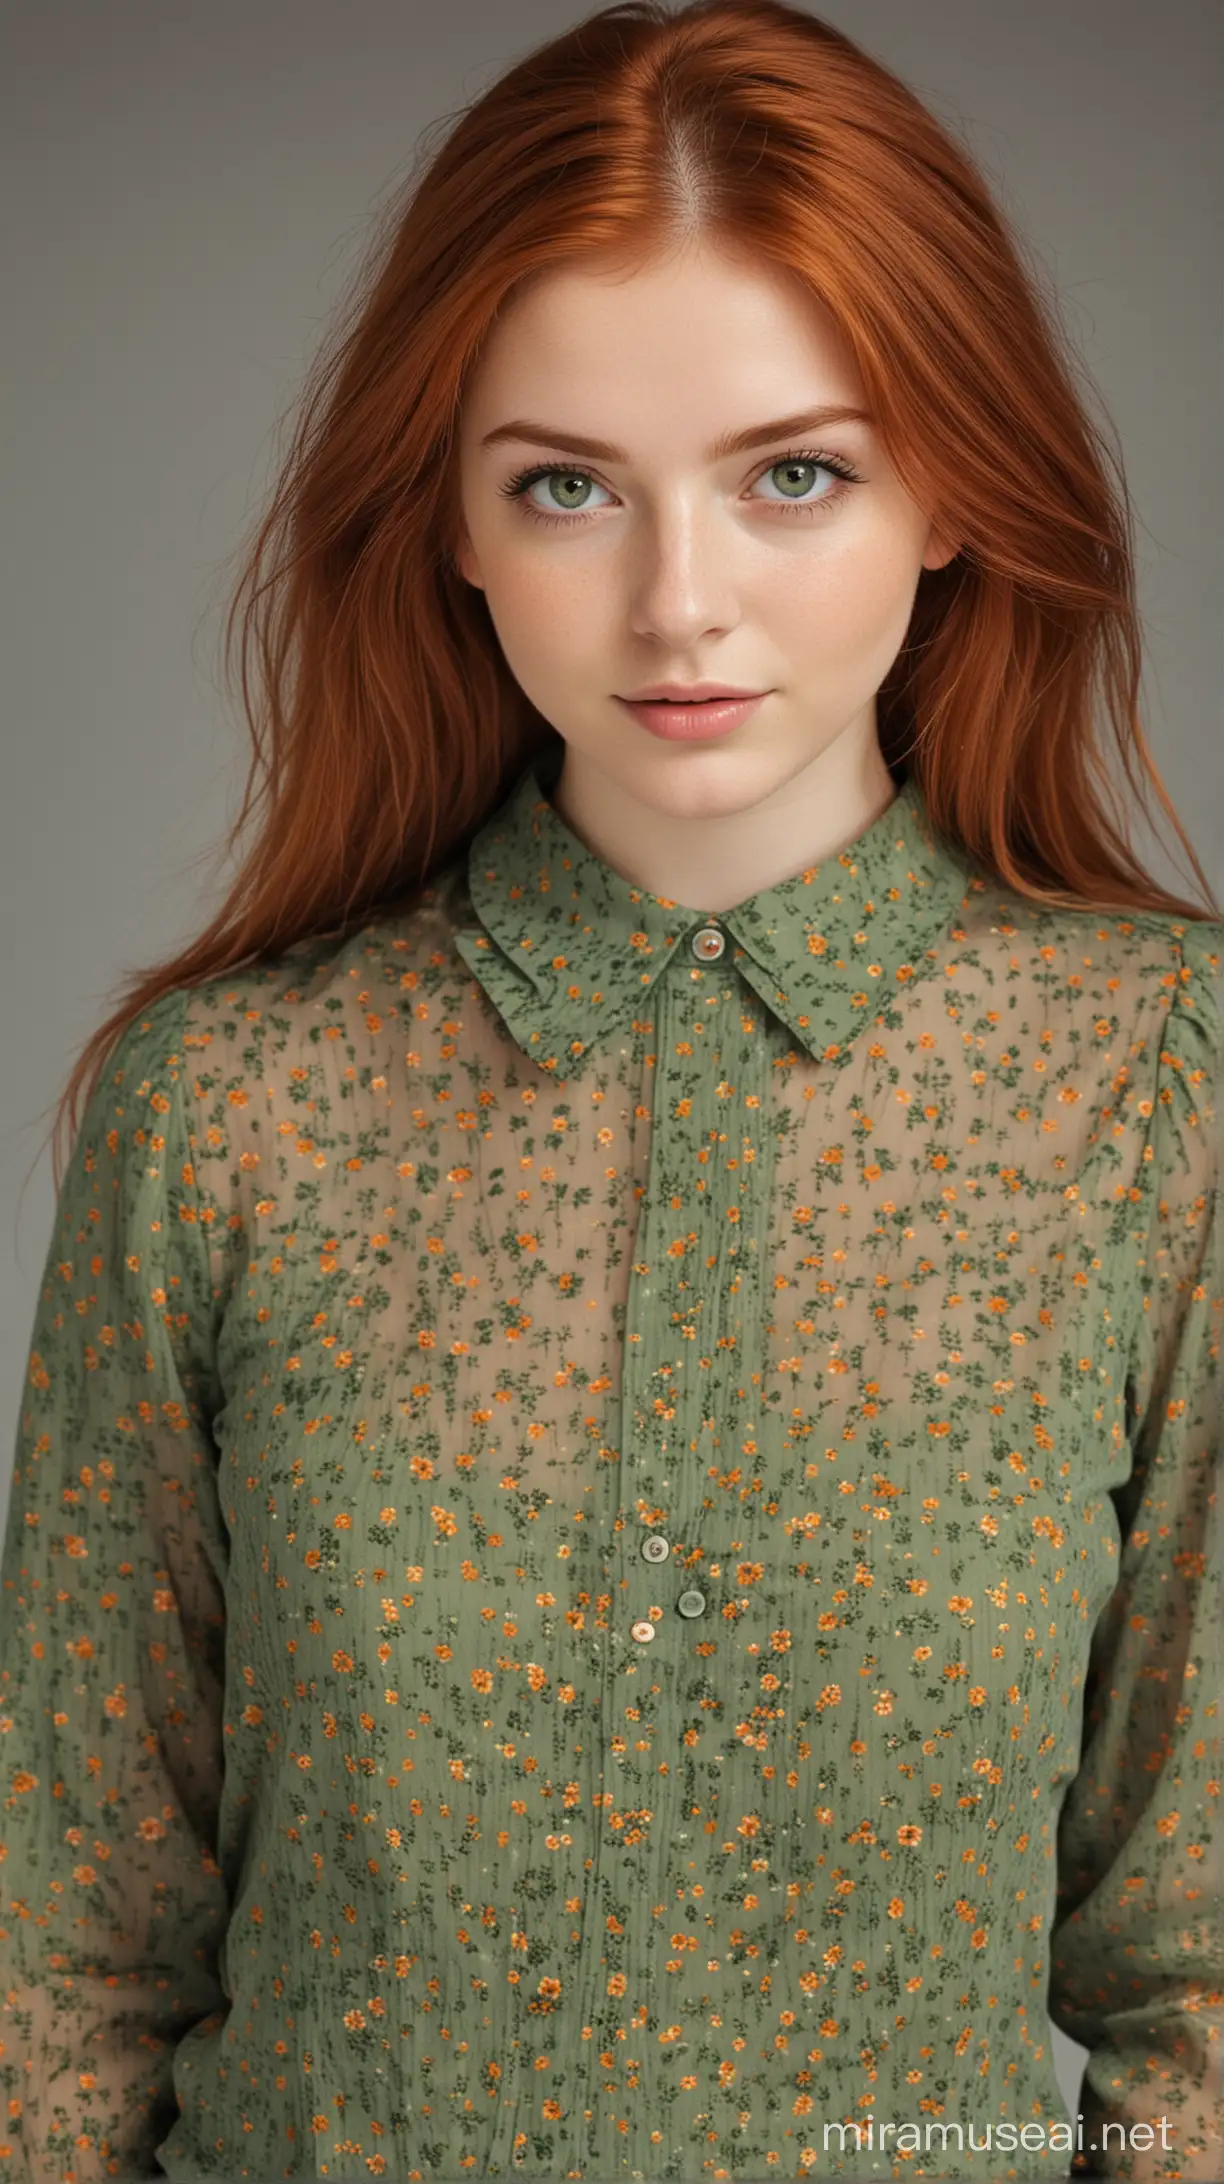 Pretty 21YearOld Woman with Red Hair and Green Eyes in Stylish Attire